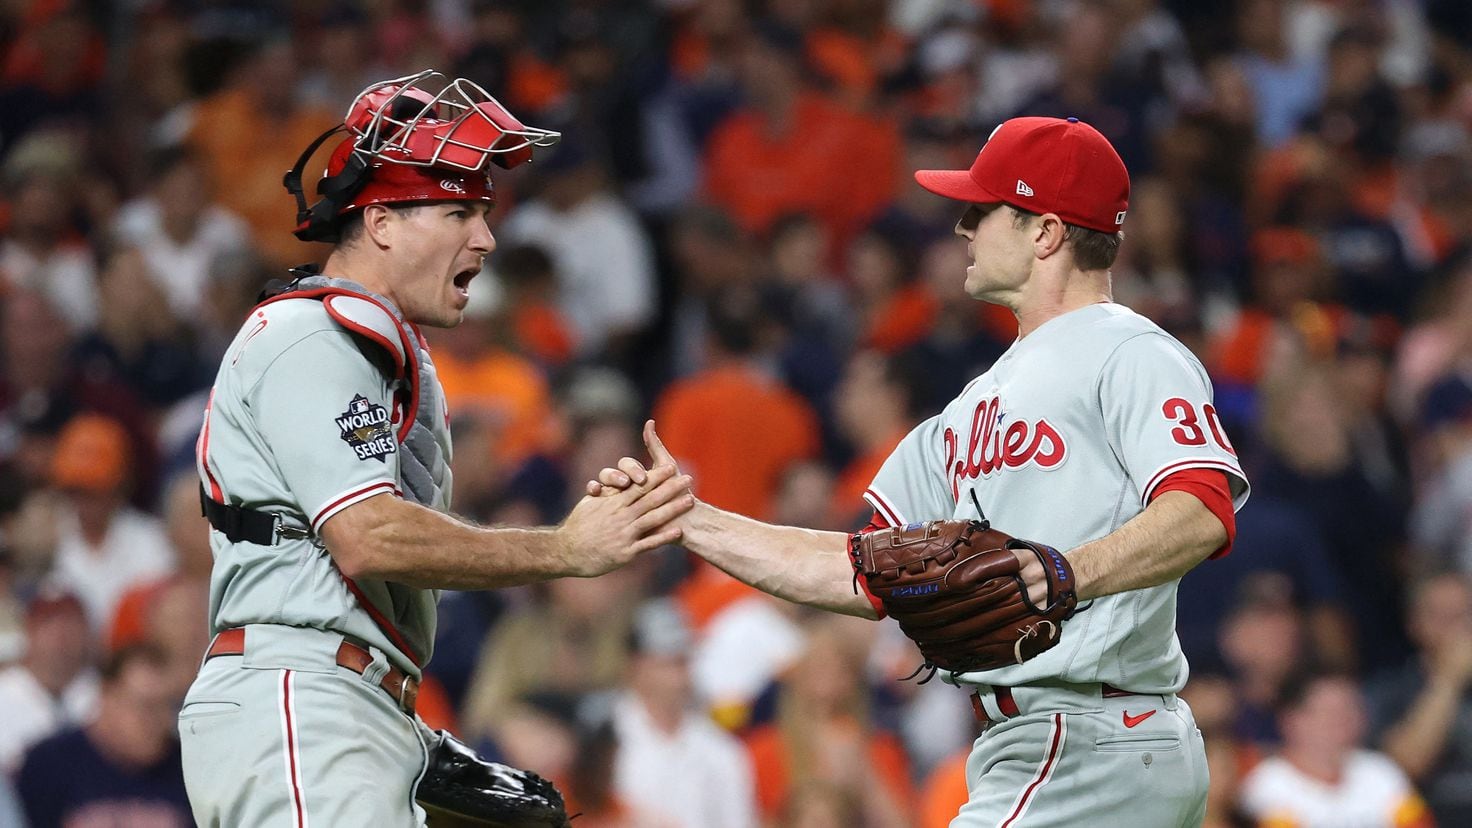 World Series: The Phillies and Astros stats that could determine